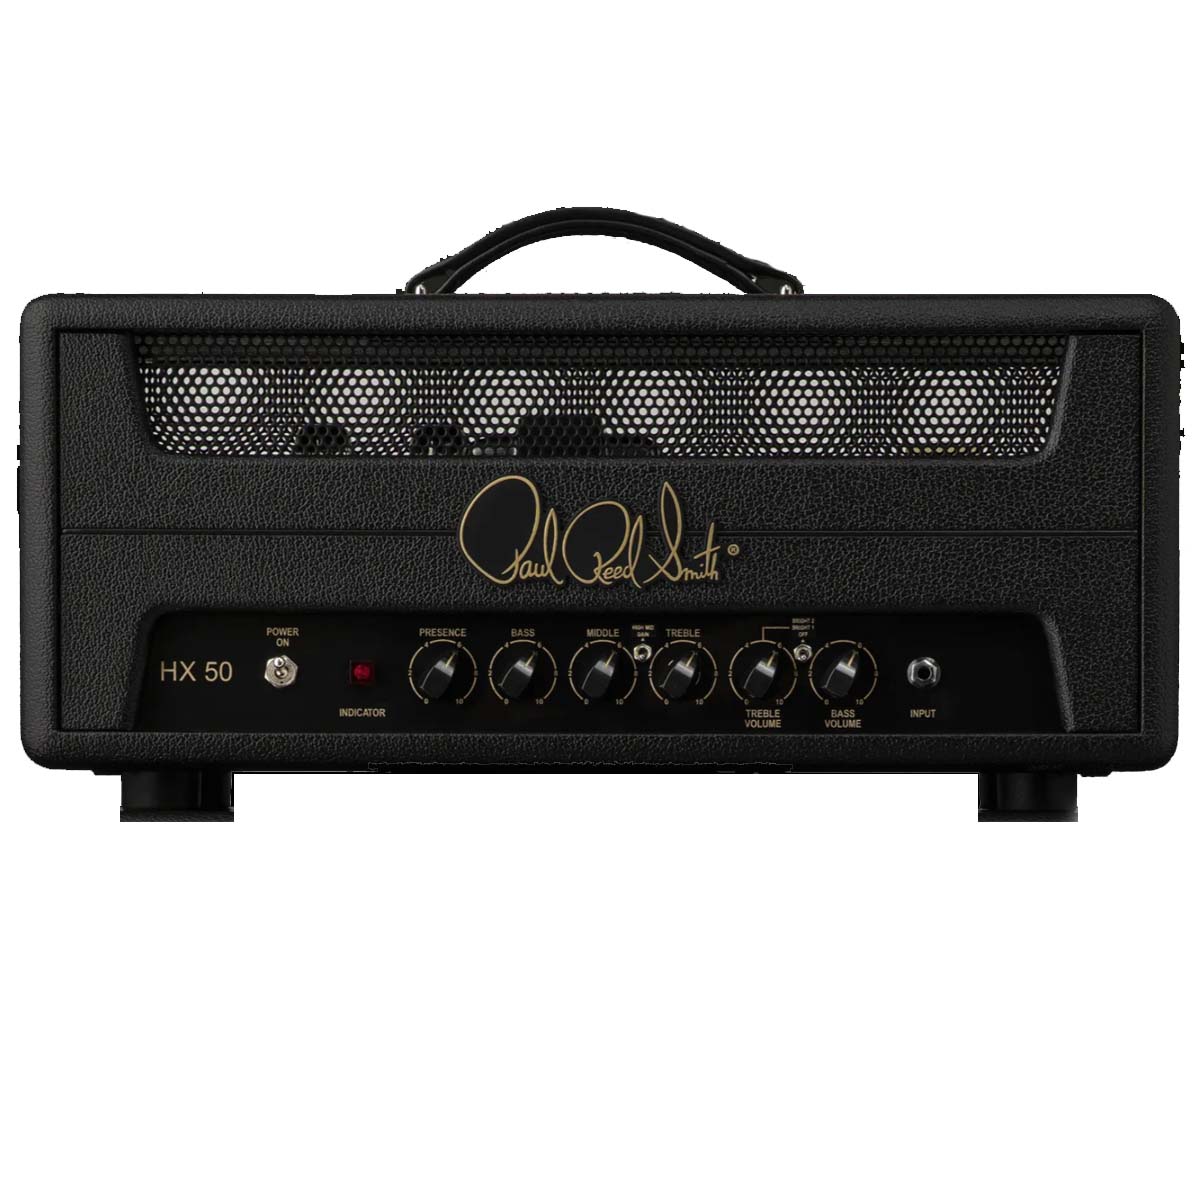 PRS Paul Reed Smith HDRX50 Guitar Amplifier Head 50w Amp